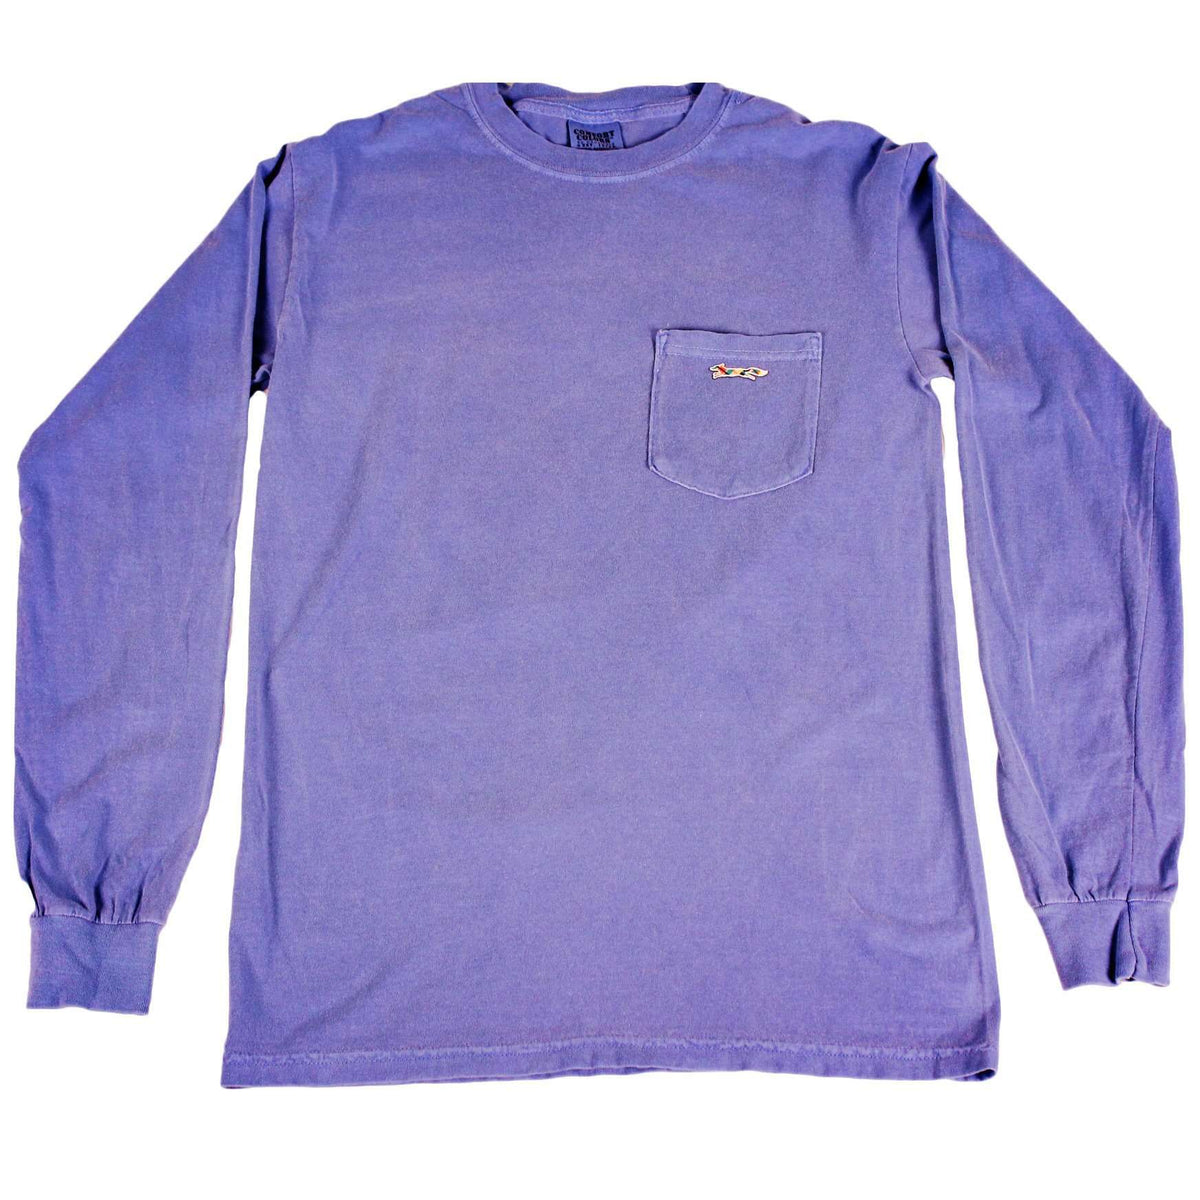 Longshanks Sewn Patch Long Sleeve Pocket Tee Shirt in Flo Blue by Country Club Prep - Country Club Prep